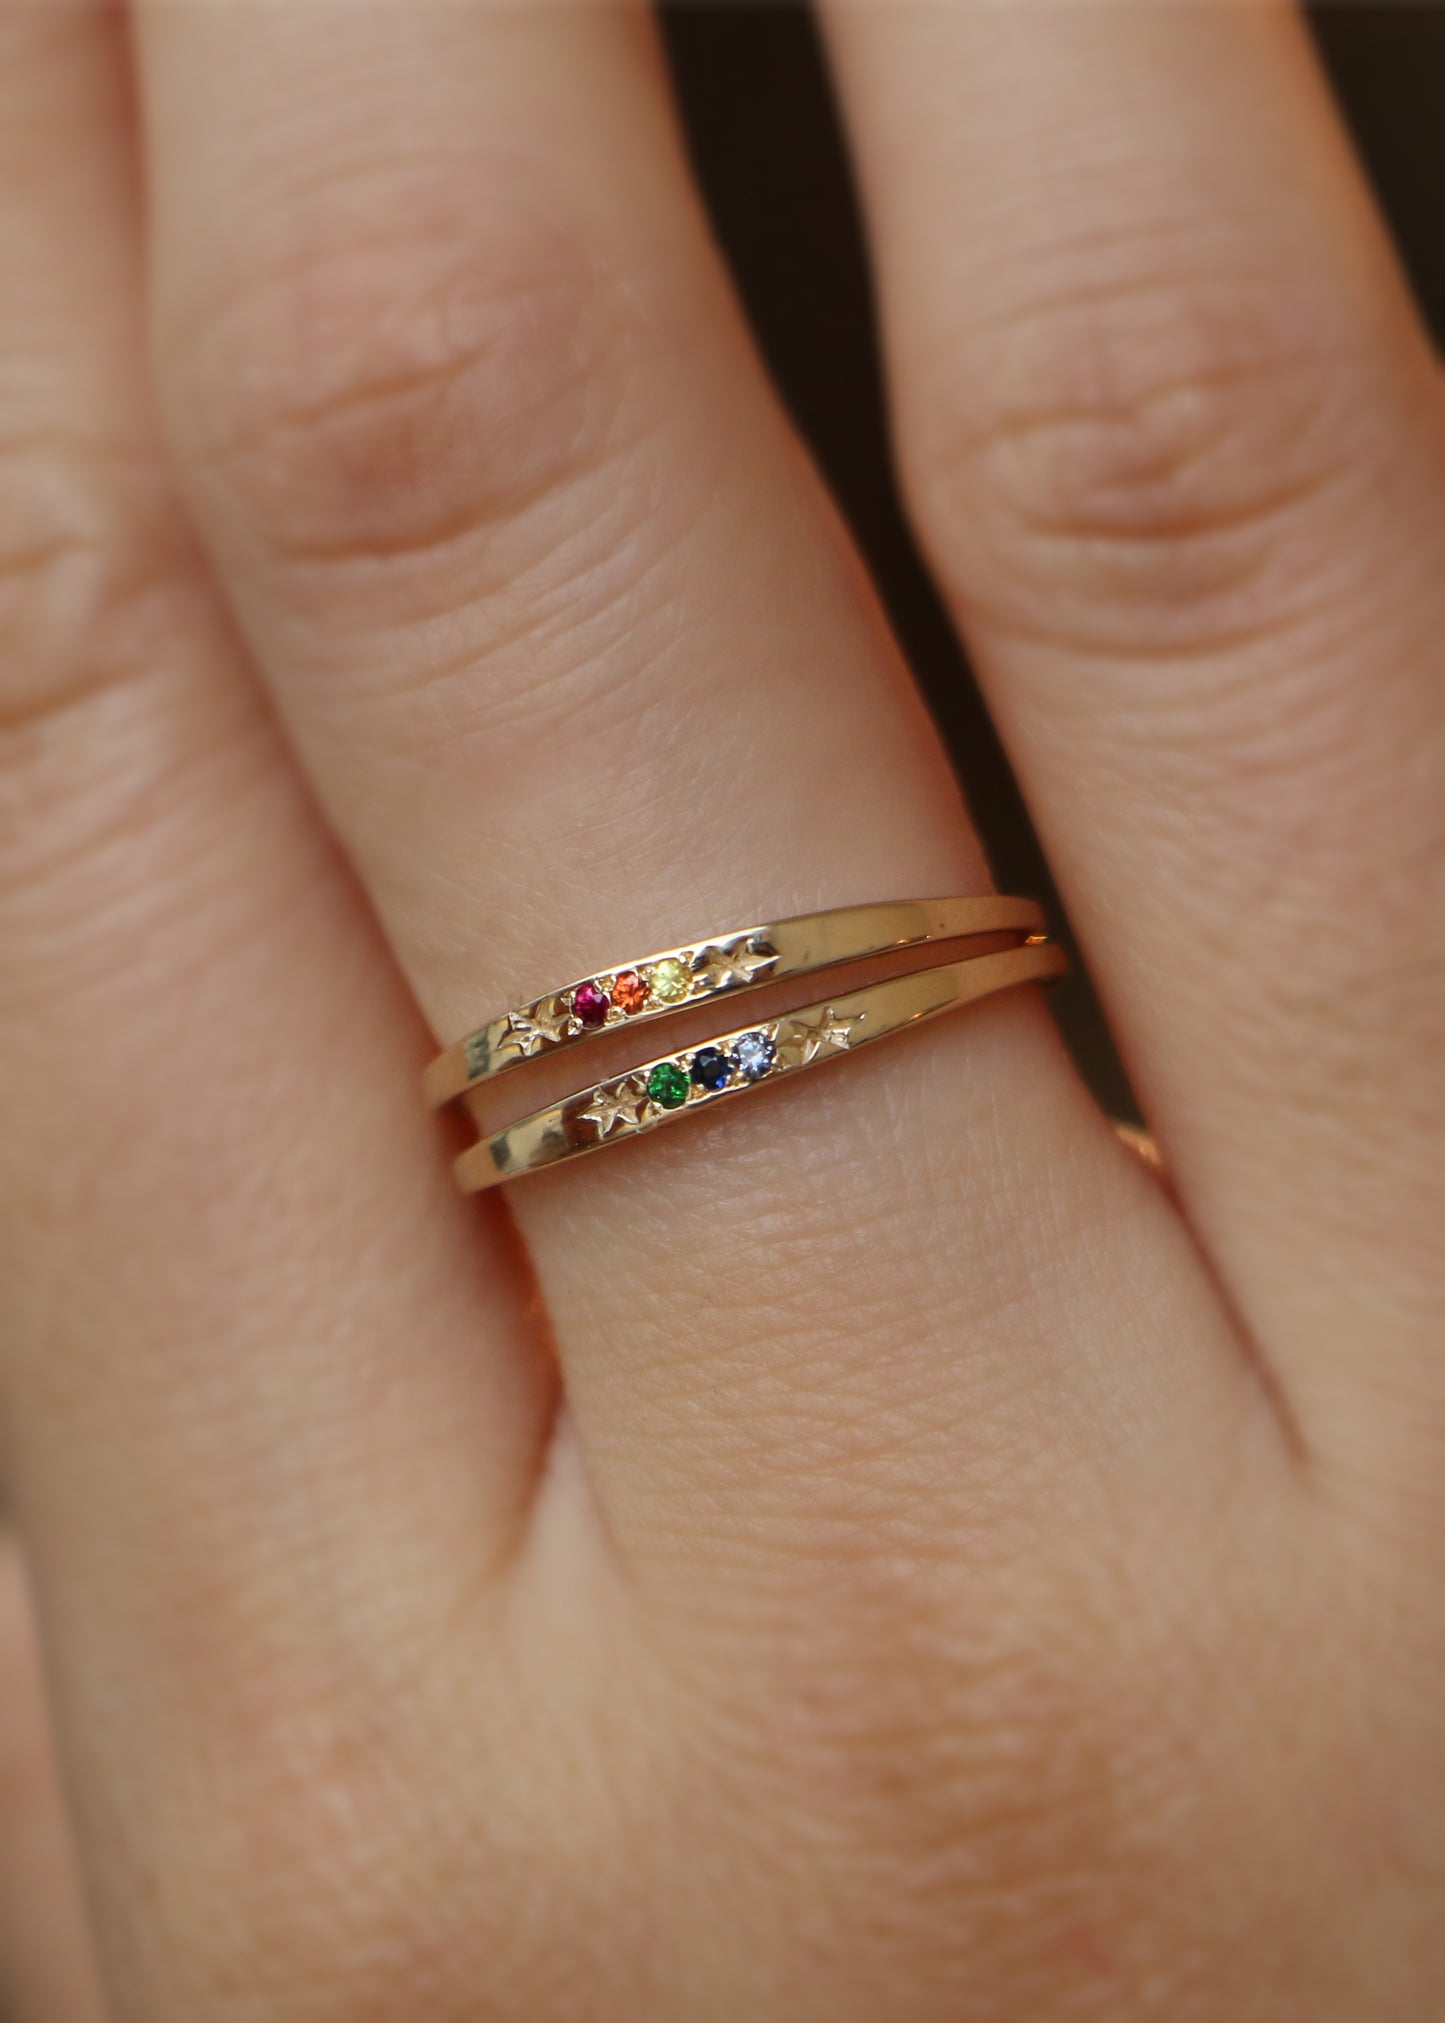 :: NEW :: EXCLUSIVE! Adorned with Pride Ring